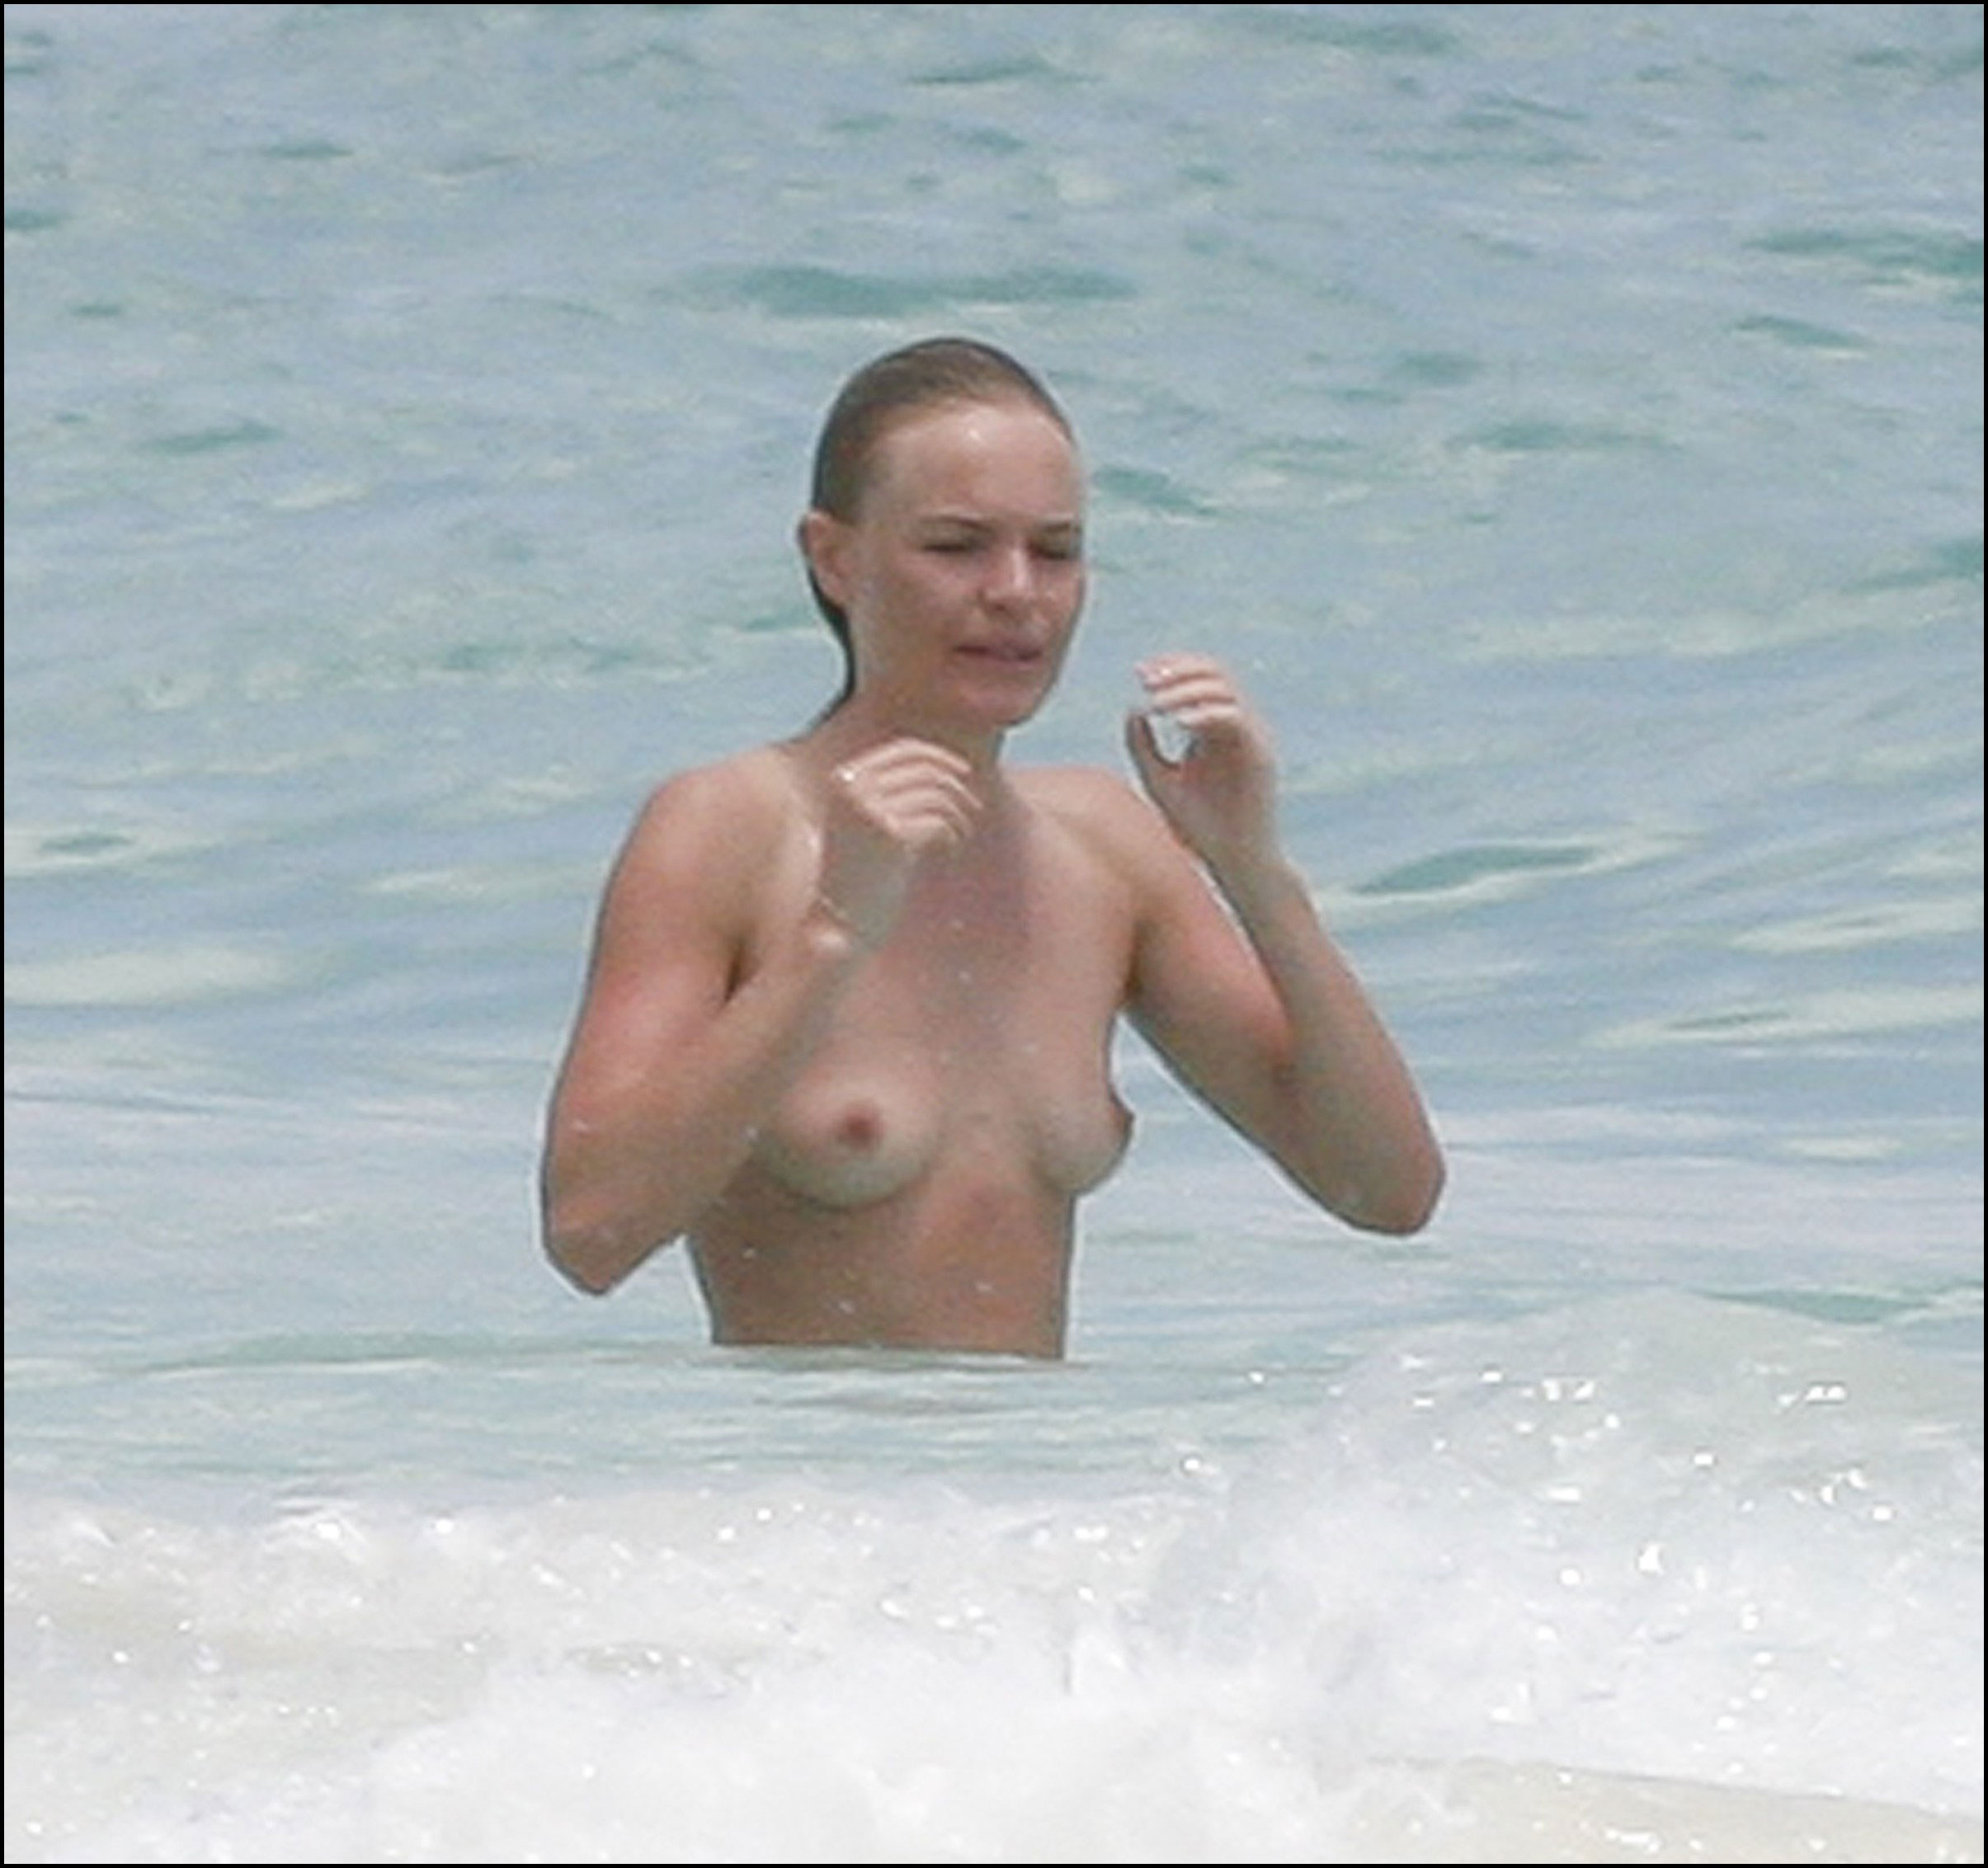 ashley guimond recommends kate bosworth naked pic pic